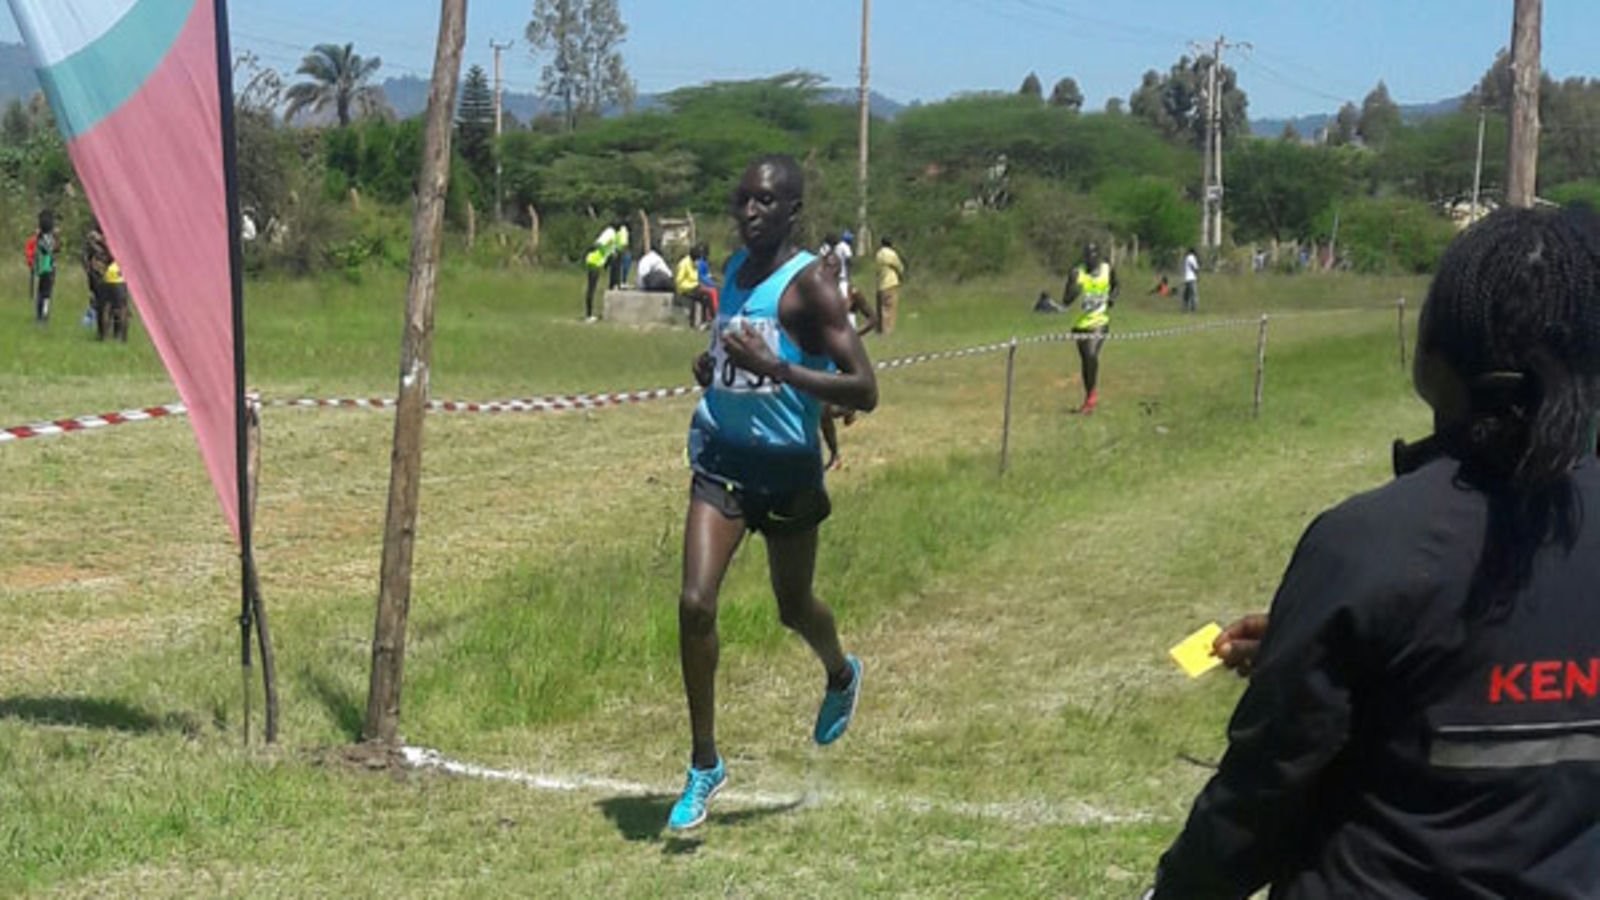 Charles Yosei and Sheila Chelangat are keen to run at both the World Cross Country Championships in Bathurst, Australia and Olympic Games in Tokyo next year